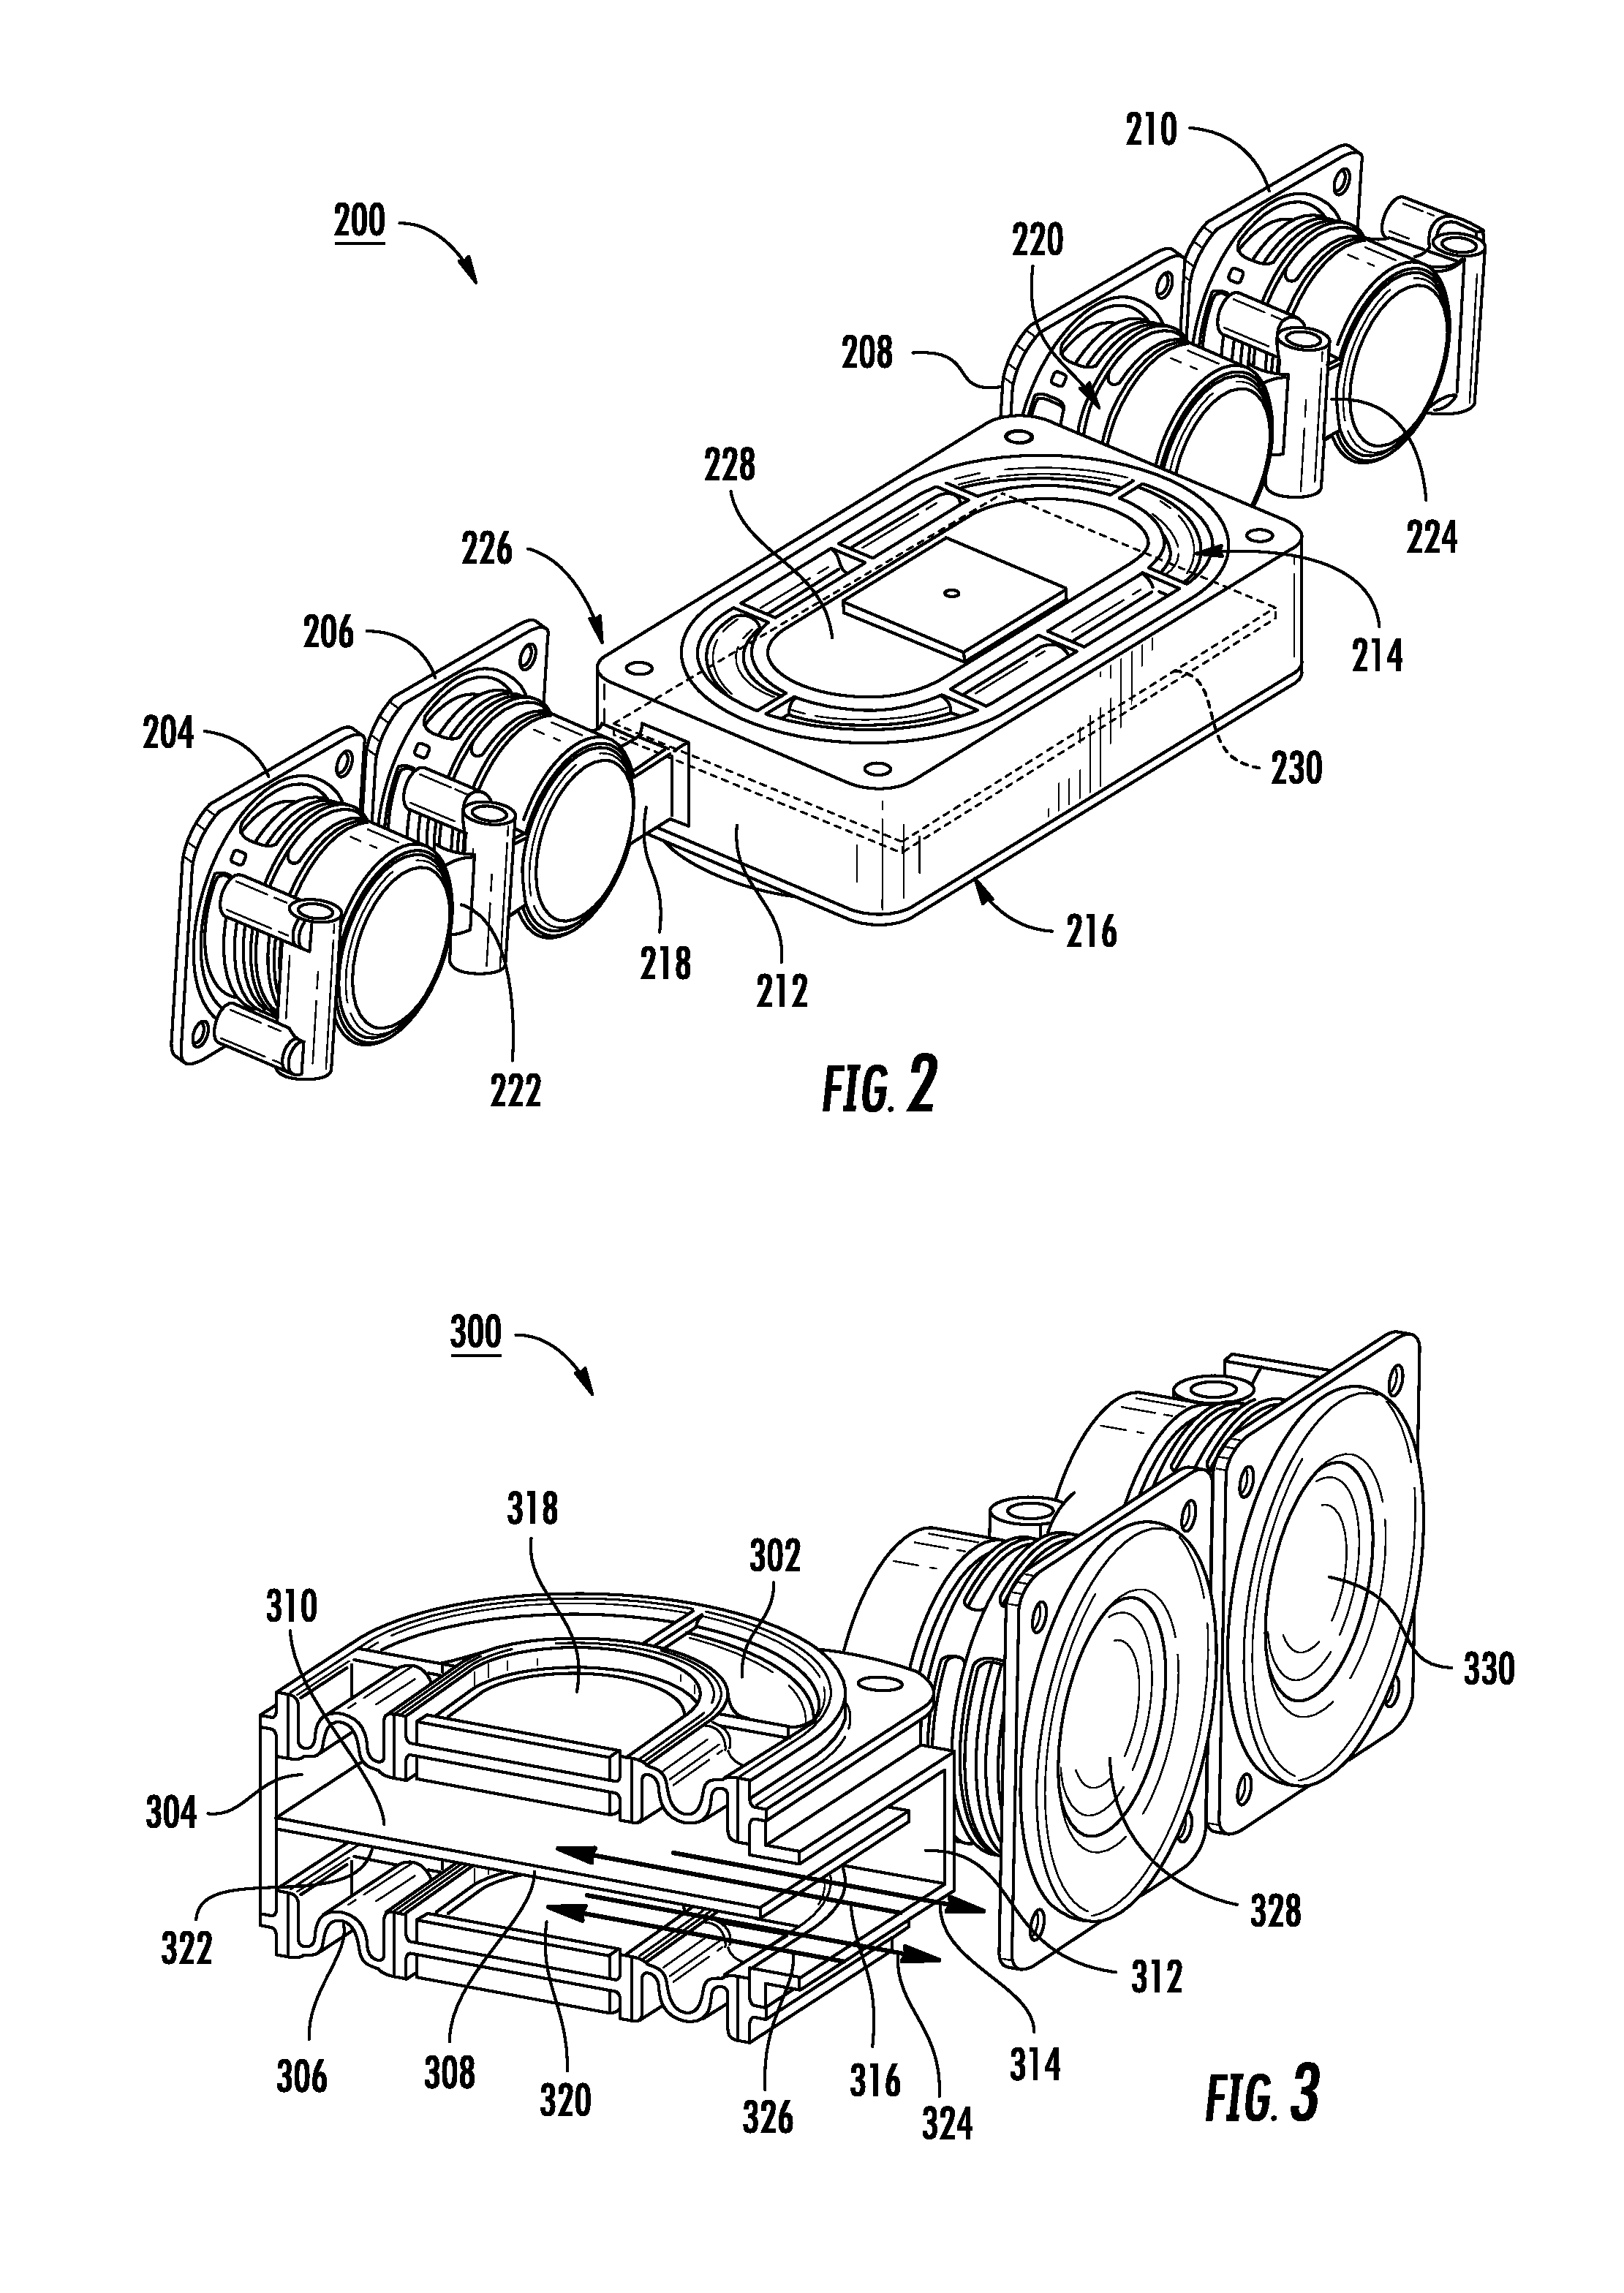 Convective airflow using a passive radiator